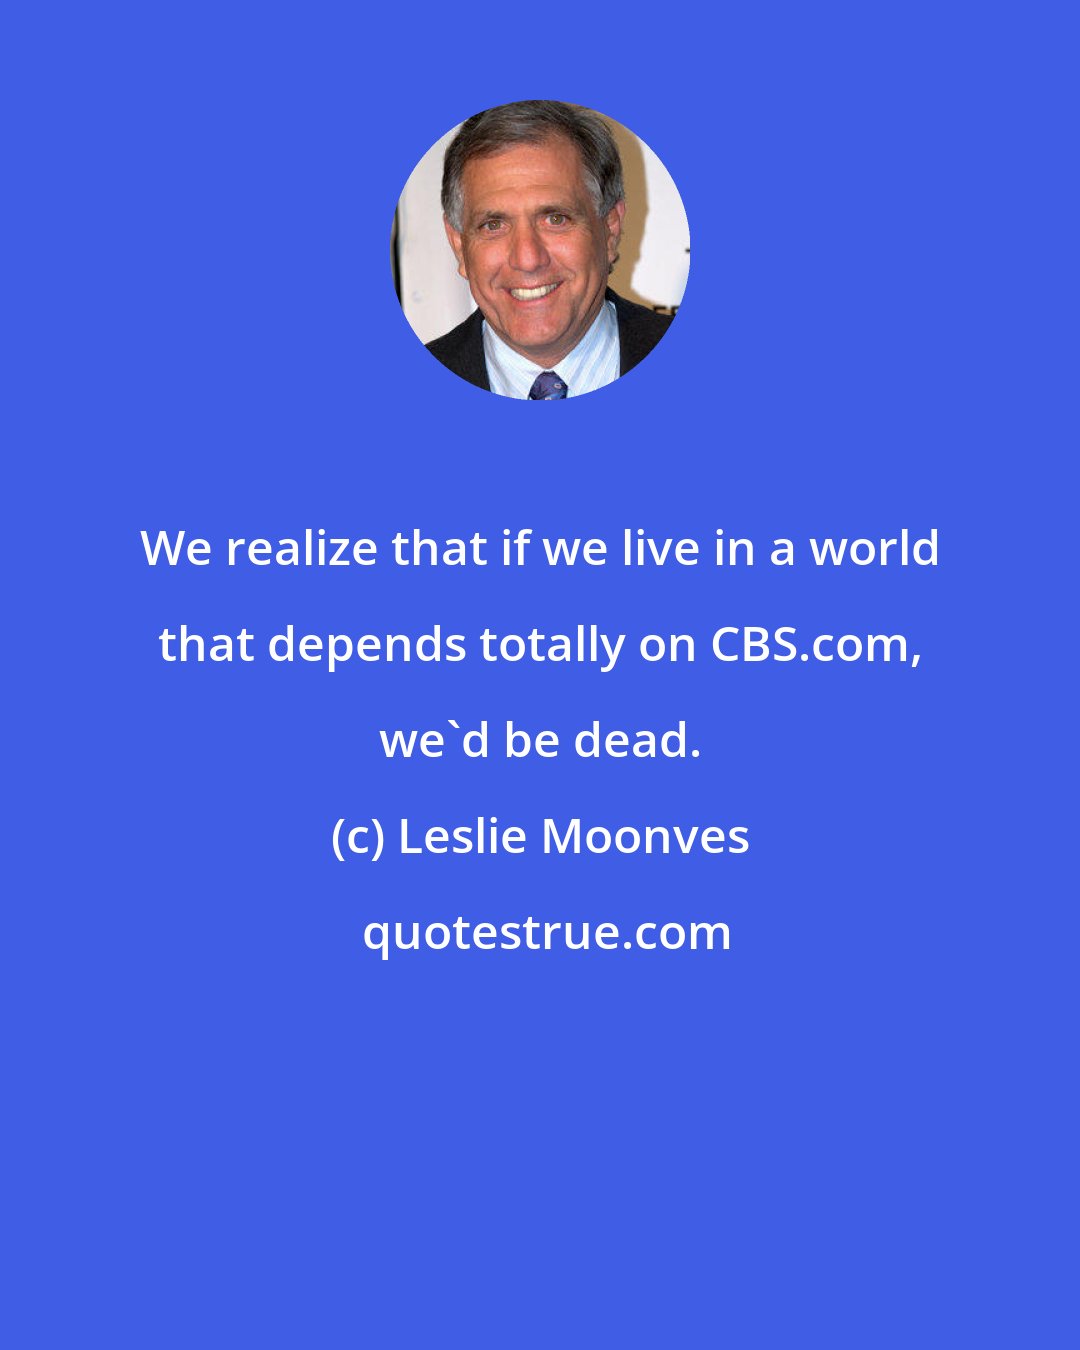 Leslie Moonves: We realize that if we live in a world that depends totally on CBS.com, we'd be dead.